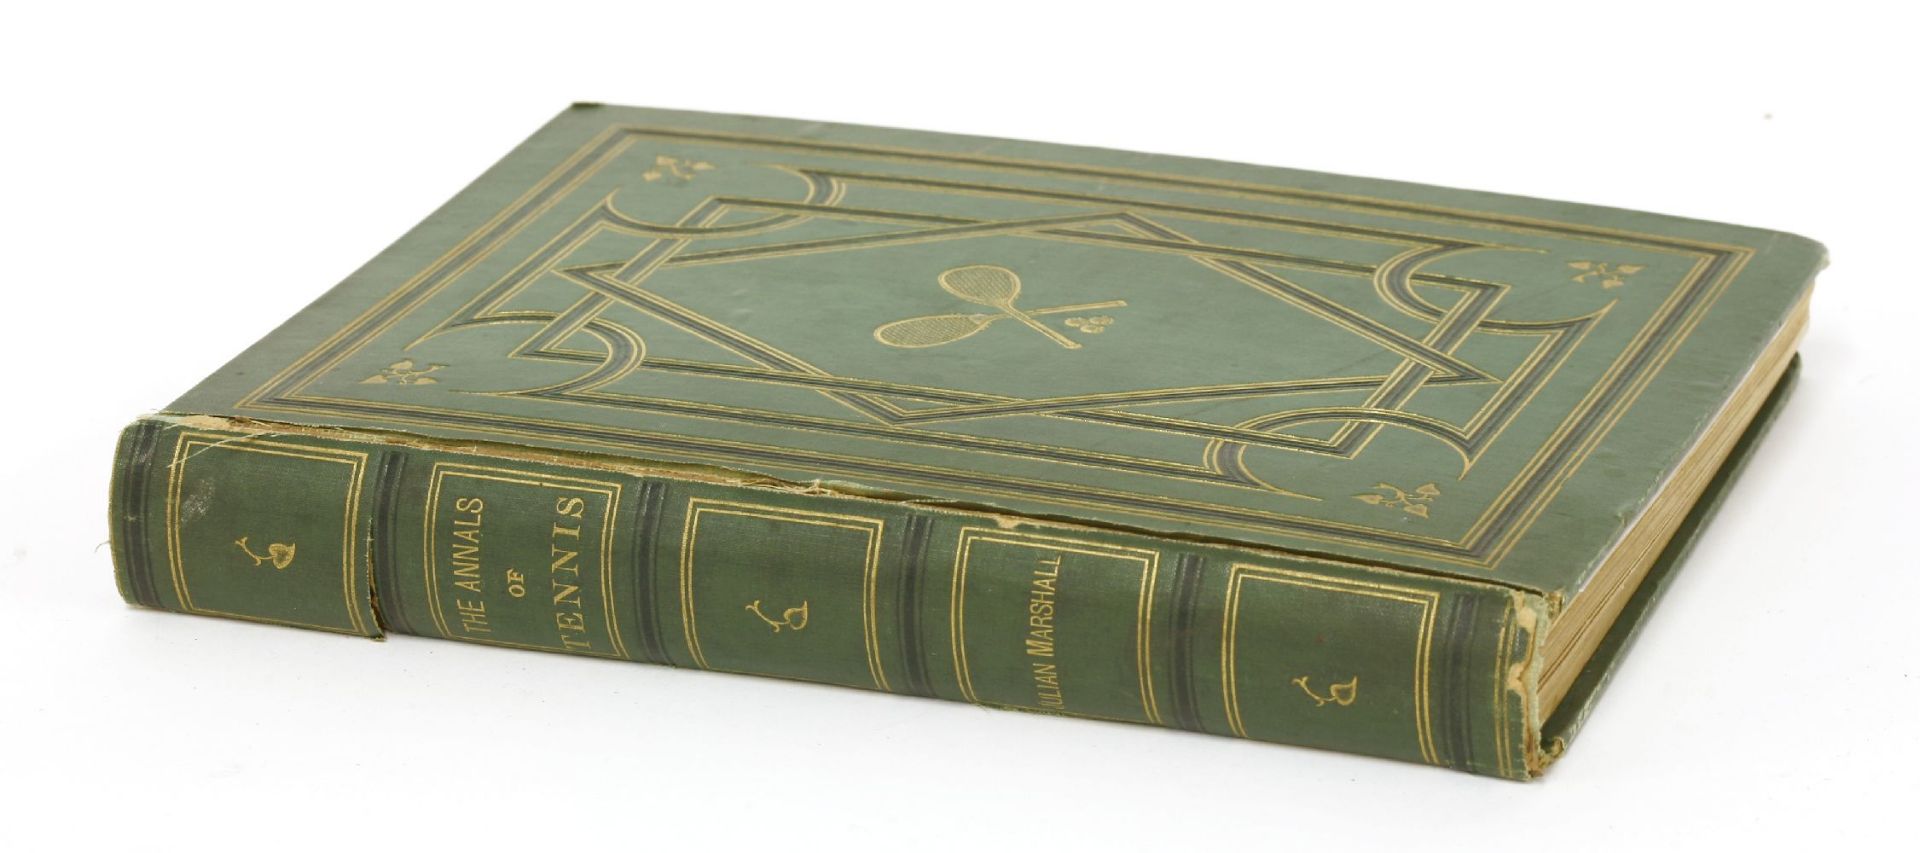 Marshall, Julian: The Annals of Tennis. 'The field' office, 1878, First edition. 4to. PP: 226,